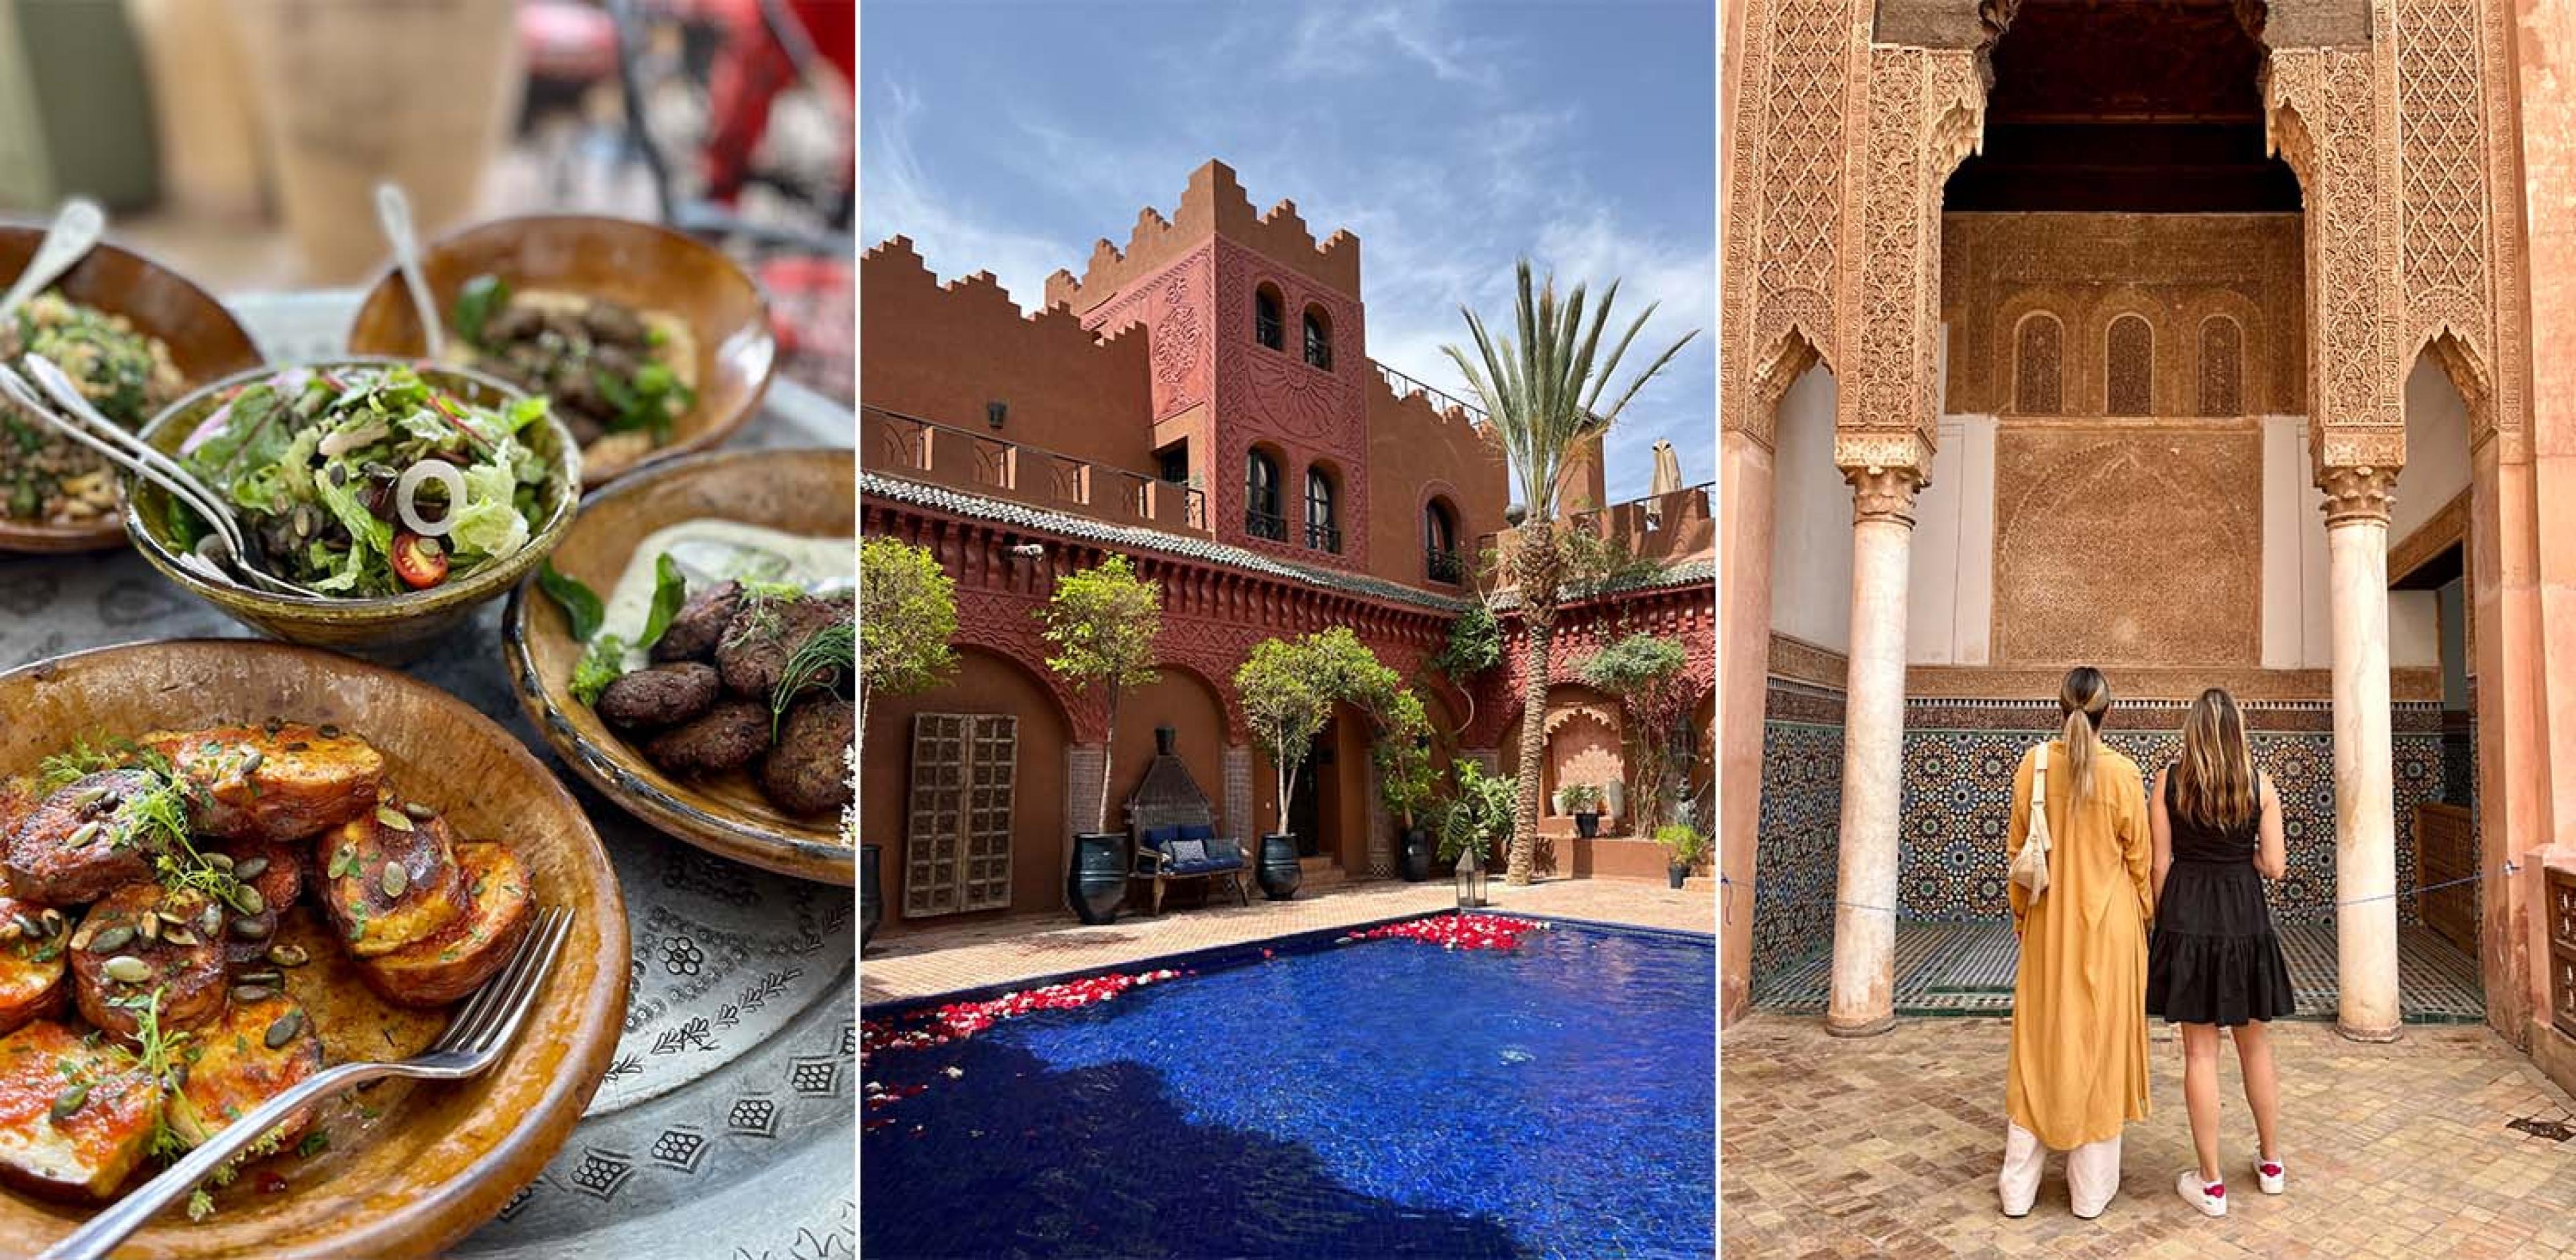 three images: one of food, one of a pool and one of two women looking at Moorish architecture